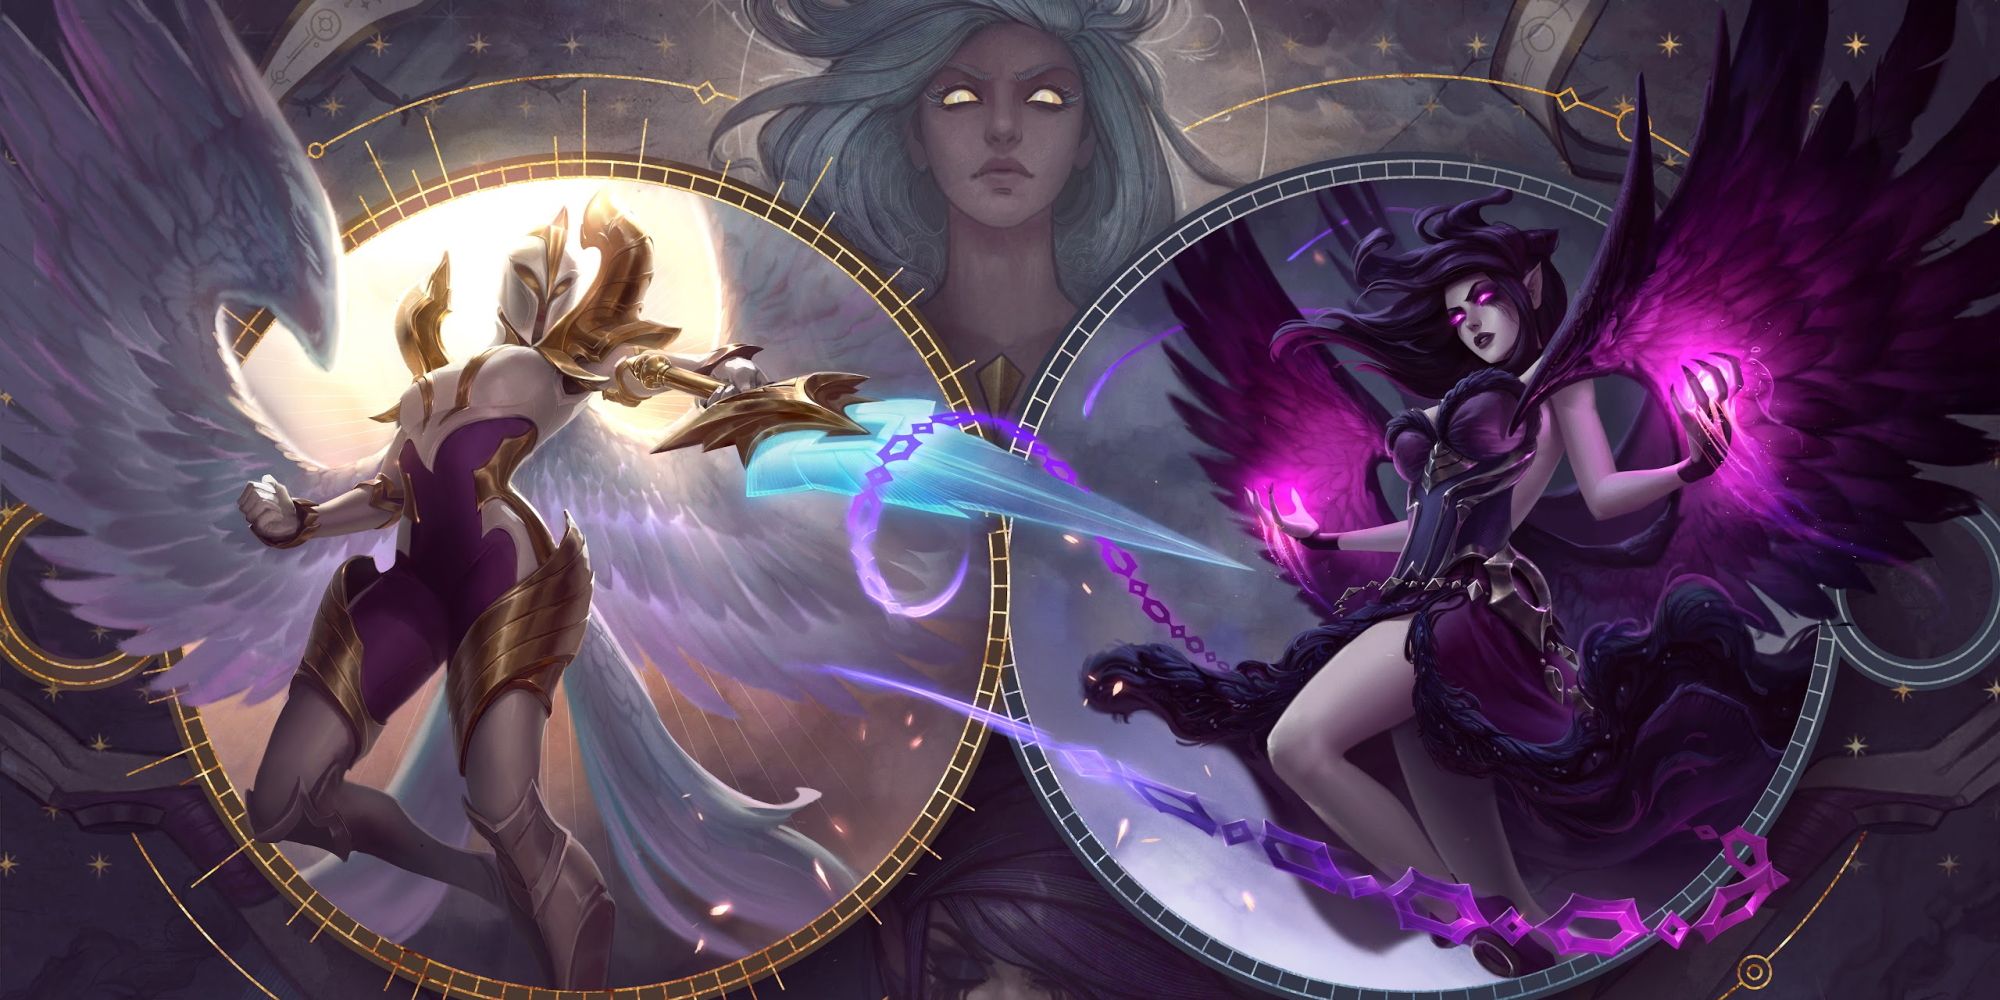 Kayle and Morgana's splash art in League of Legends.